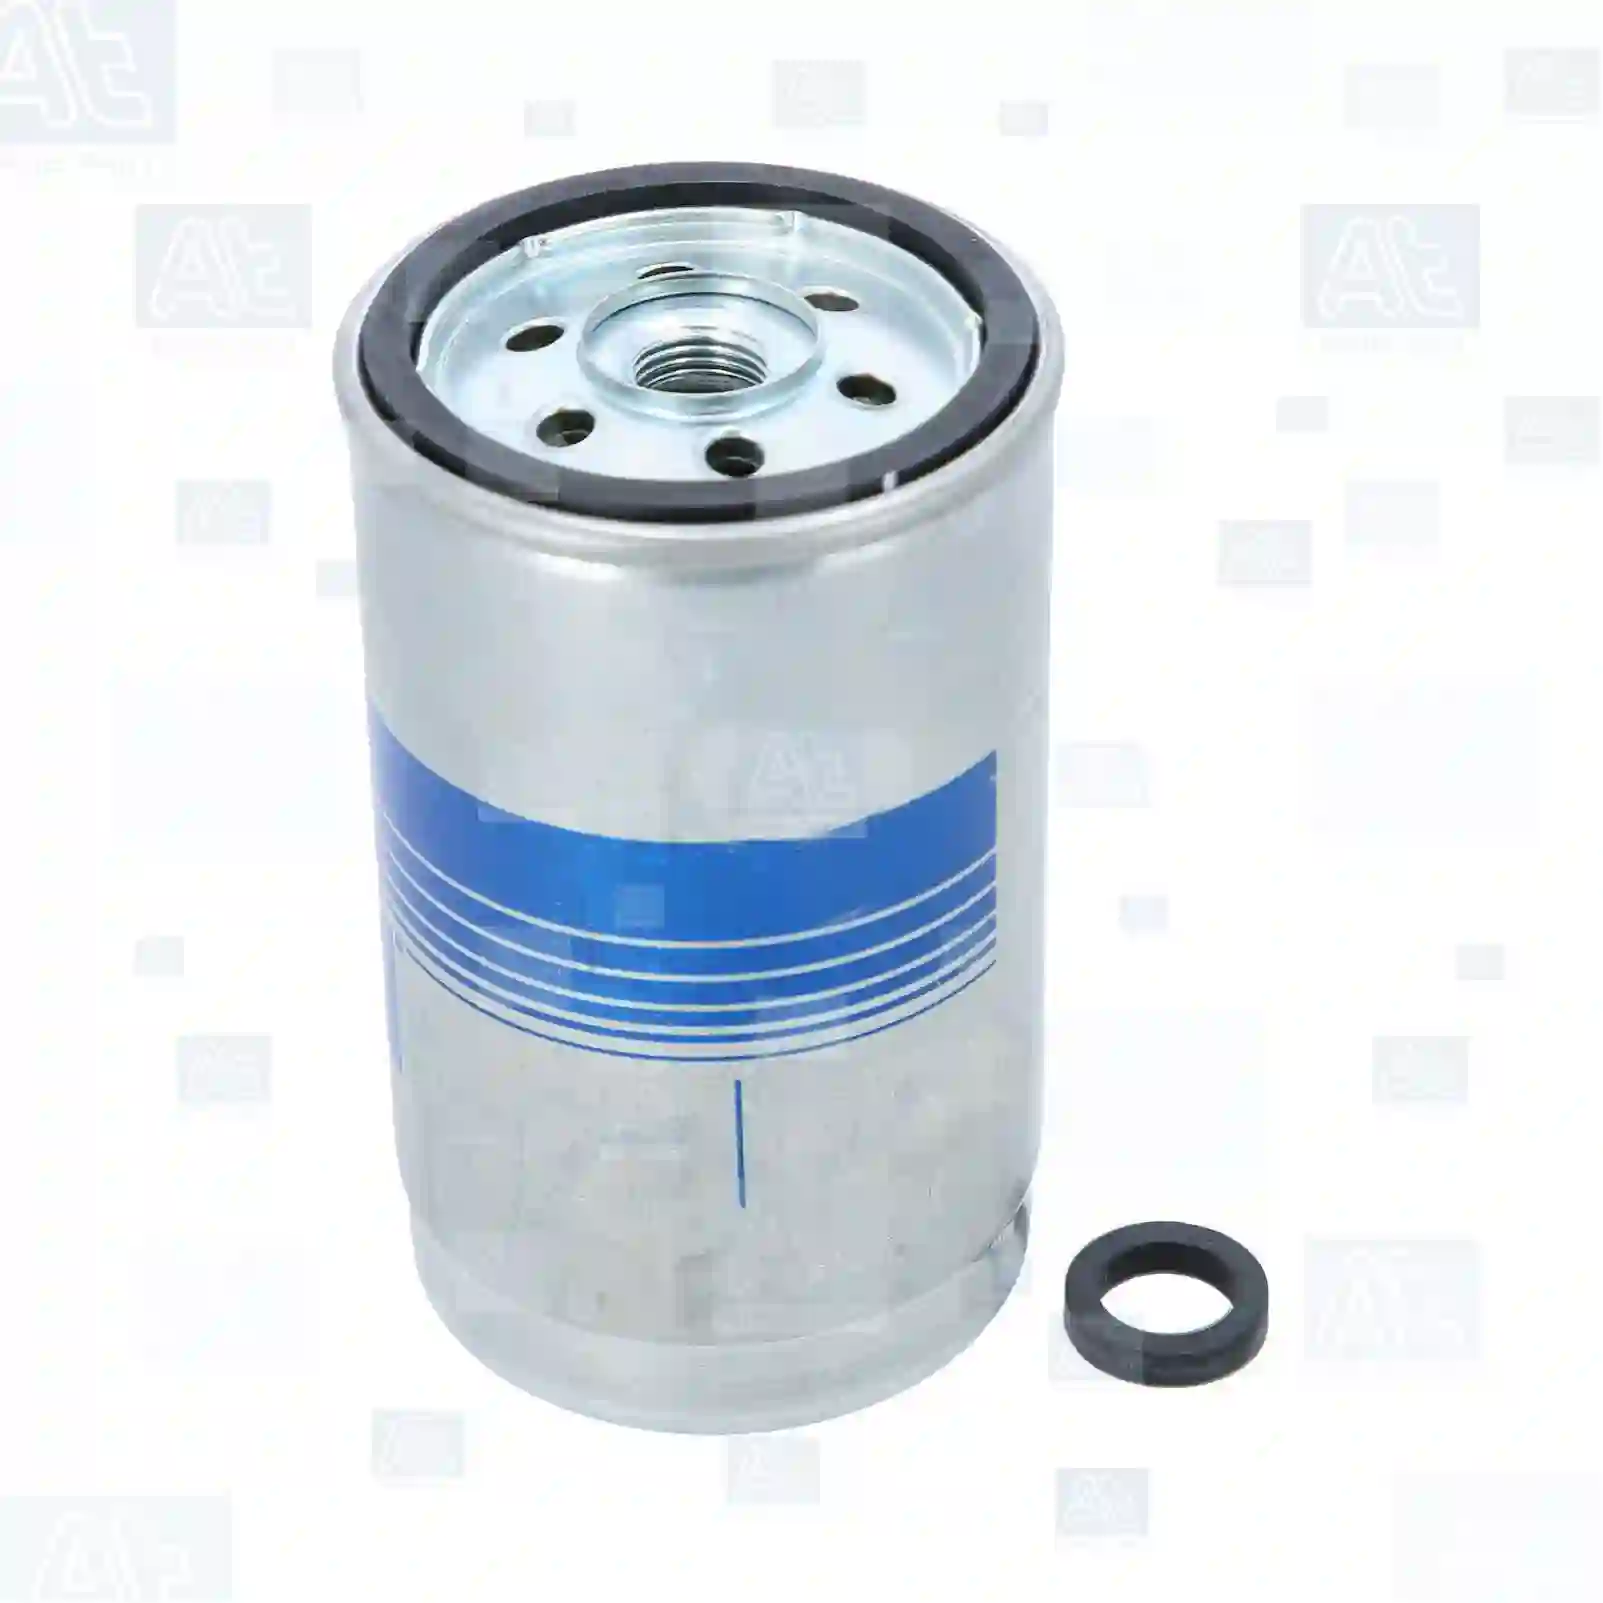 Fuel filter, 77723263, 1500611, 01182224, F816200060010, F816200060020, F816200710060, G311200060010, G311200060050, X810190165000, 7000712, 7008775, 7012763, 7382048, 8145894, 9145894, 9145984, 51125030004, 51125030005, 51125030009, 51125030010, 51125030012, 51125030016, 51125030017, 51125030018, 51125030028, 51125030029, 51125030030, 51125030031, 51125030034, 51125030036, 51125030039, 51125030040, 51125030072, 51125031016, 81125030075, 82125030040, 84125030002, 85100001834, 85100002764, 85120007007, N1011005915, N1011005926, N1014003174, 51125030040, 0018354447, 8319121610, 8311997648, 83119976480, 8319121610, 83191281610, 0170152000, 170152000, 60507485 ||  77723263 At Spare Part | Engine, Accelerator Pedal, Camshaft, Connecting Rod, Crankcase, Crankshaft, Cylinder Head, Engine Suspension Mountings, Exhaust Manifold, Exhaust Gas Recirculation, Filter Kits, Flywheel Housing, General Overhaul Kits, Engine, Intake Manifold, Oil Cleaner, Oil Cooler, Oil Filter, Oil Pump, Oil Sump, Piston & Liner, Sensor & Switch, Timing Case, Turbocharger, Cooling System, Belt Tensioner, Coolant Filter, Coolant Pipe, Corrosion Prevention Agent, Drive, Expansion Tank, Fan, Intercooler, Monitors & Gauges, Radiator, Thermostat, V-Belt / Timing belt, Water Pump, Fuel System, Electronical Injector Unit, Feed Pump, Fuel Filter, cpl., Fuel Gauge Sender,  Fuel Line, Fuel Pump, Fuel Tank, Injection Line Kit, Injection Pump, Exhaust System, Clutch & Pedal, Gearbox, Propeller Shaft, Axles, Brake System, Hubs & Wheels, Suspension, Leaf Spring, Universal Parts / Accessories, Steering, Electrical System, Cabin Fuel filter, 77723263, 1500611, 01182224, F816200060010, F816200060020, F816200710060, G311200060010, G311200060050, X810190165000, 7000712, 7008775, 7012763, 7382048, 8145894, 9145894, 9145984, 51125030004, 51125030005, 51125030009, 51125030010, 51125030012, 51125030016, 51125030017, 51125030018, 51125030028, 51125030029, 51125030030, 51125030031, 51125030034, 51125030036, 51125030039, 51125030040, 51125030072, 51125031016, 81125030075, 82125030040, 84125030002, 85100001834, 85100002764, 85120007007, N1011005915, N1011005926, N1014003174, 51125030040, 0018354447, 8319121610, 8311997648, 83119976480, 8319121610, 83191281610, 0170152000, 170152000, 60507485 ||  77723263 At Spare Part | Engine, Accelerator Pedal, Camshaft, Connecting Rod, Crankcase, Crankshaft, Cylinder Head, Engine Suspension Mountings, Exhaust Manifold, Exhaust Gas Recirculation, Filter Kits, Flywheel Housing, General Overhaul Kits, Engine, Intake Manifold, Oil Cleaner, Oil Cooler, Oil Filter, Oil Pump, Oil Sump, Piston & Liner, Sensor & Switch, Timing Case, Turbocharger, Cooling System, Belt Tensioner, Coolant Filter, Coolant Pipe, Corrosion Prevention Agent, Drive, Expansion Tank, Fan, Intercooler, Monitors & Gauges, Radiator, Thermostat, V-Belt / Timing belt, Water Pump, Fuel System, Electronical Injector Unit, Feed Pump, Fuel Filter, cpl., Fuel Gauge Sender,  Fuel Line, Fuel Pump, Fuel Tank, Injection Line Kit, Injection Pump, Exhaust System, Clutch & Pedal, Gearbox, Propeller Shaft, Axles, Brake System, Hubs & Wheels, Suspension, Leaf Spring, Universal Parts / Accessories, Steering, Electrical System, Cabin